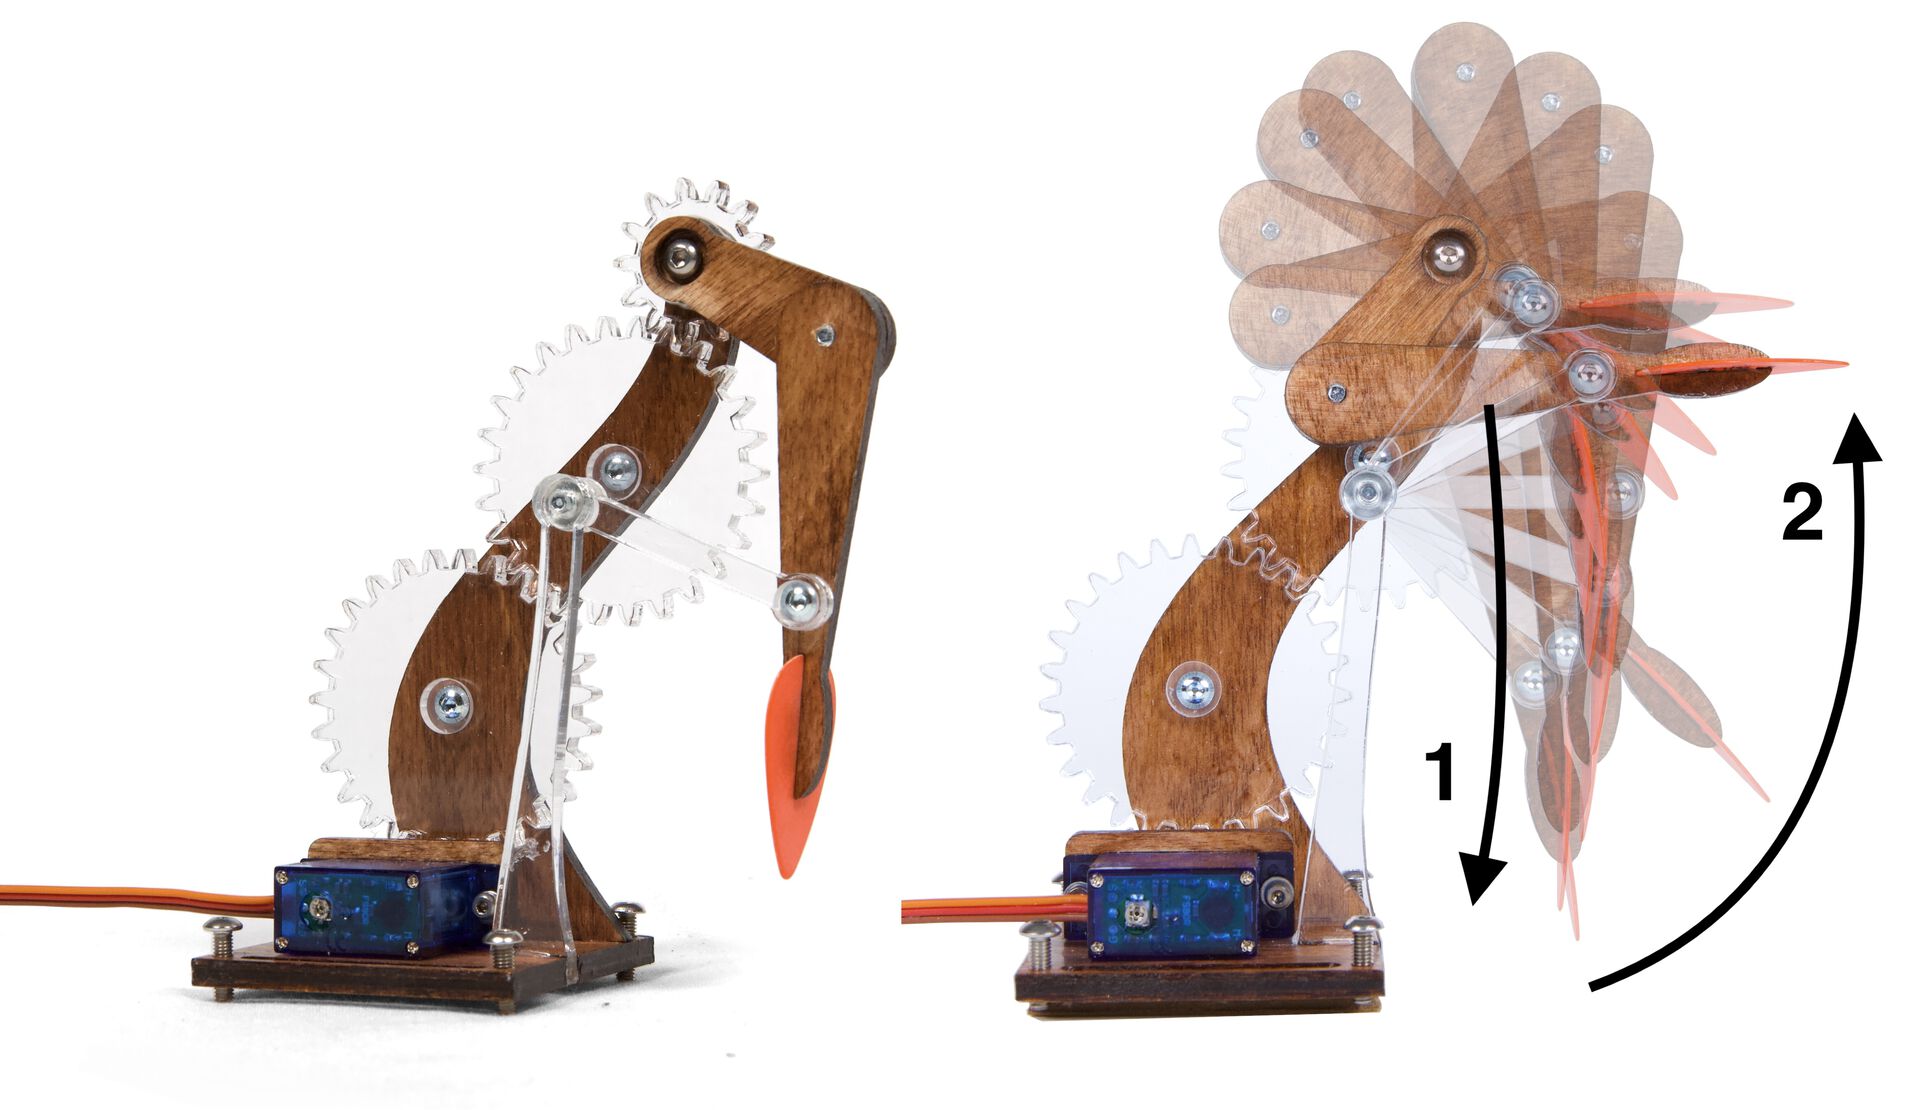 Left: A strange and beautiful crank and rocker linkage with a guitar pick on the end of it. Right: Several superimposed images of the same, showing the crank at many different angles.